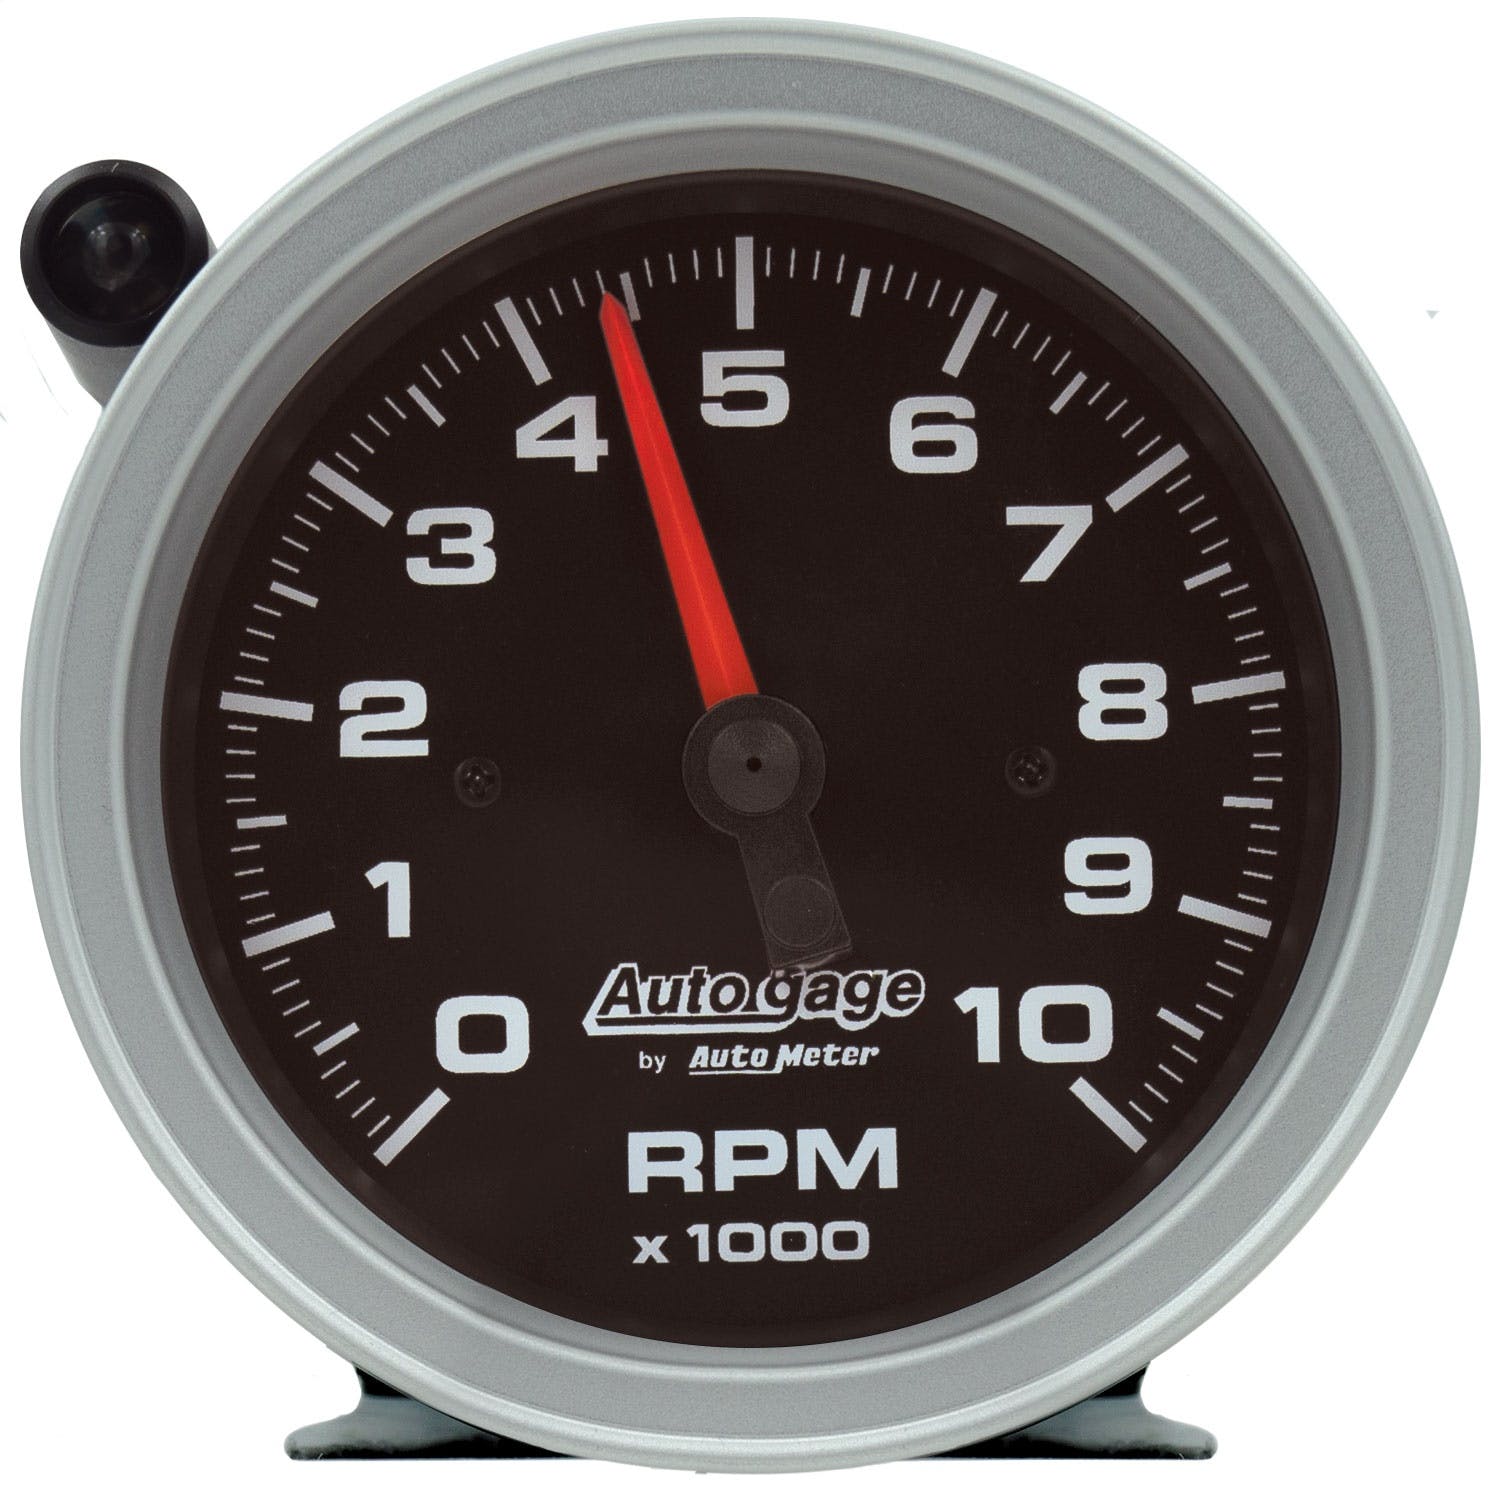 AutoMeter Products 233908 Gauge Tachometer 3 3/4, 10K RPM, Pedestal with Ext Shift Light, Blk Dial and Case